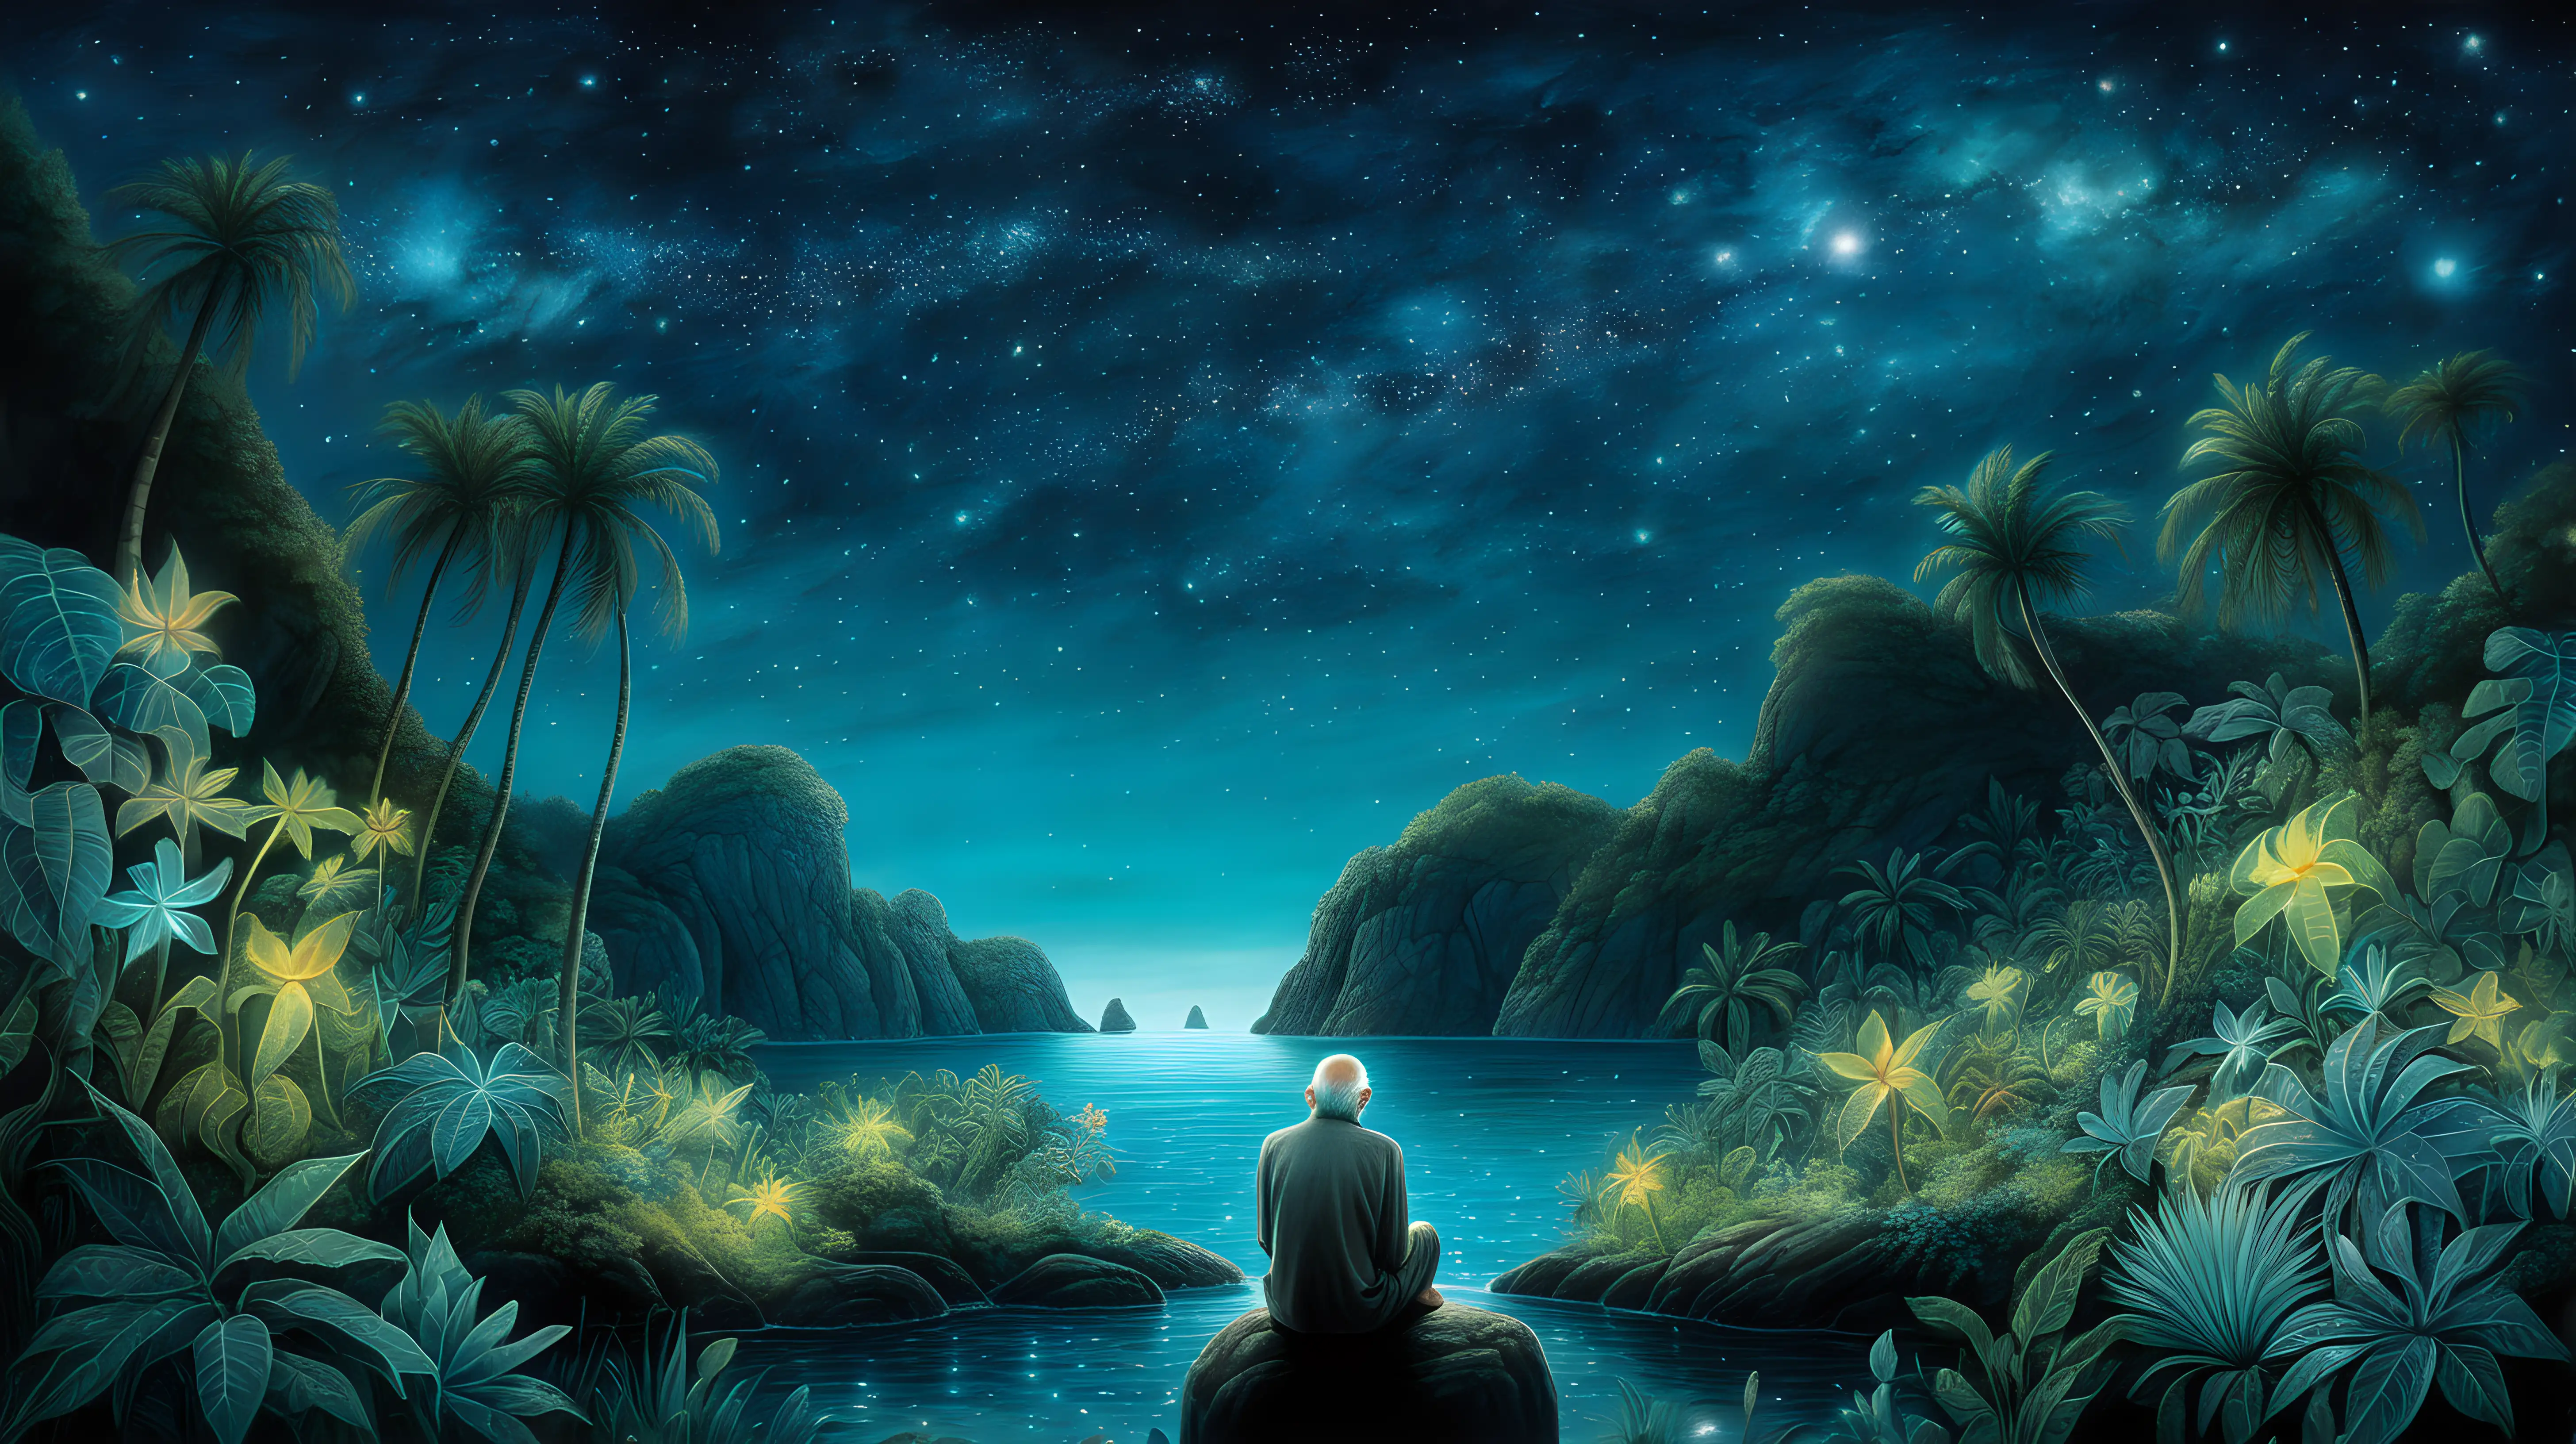 Illustrate the old man in a contemplative pose, surrounded by a sea of bioluminescent plants, the night sky above twinkling with stars, conveying a sense of mystery and adventure in the magical jungle.